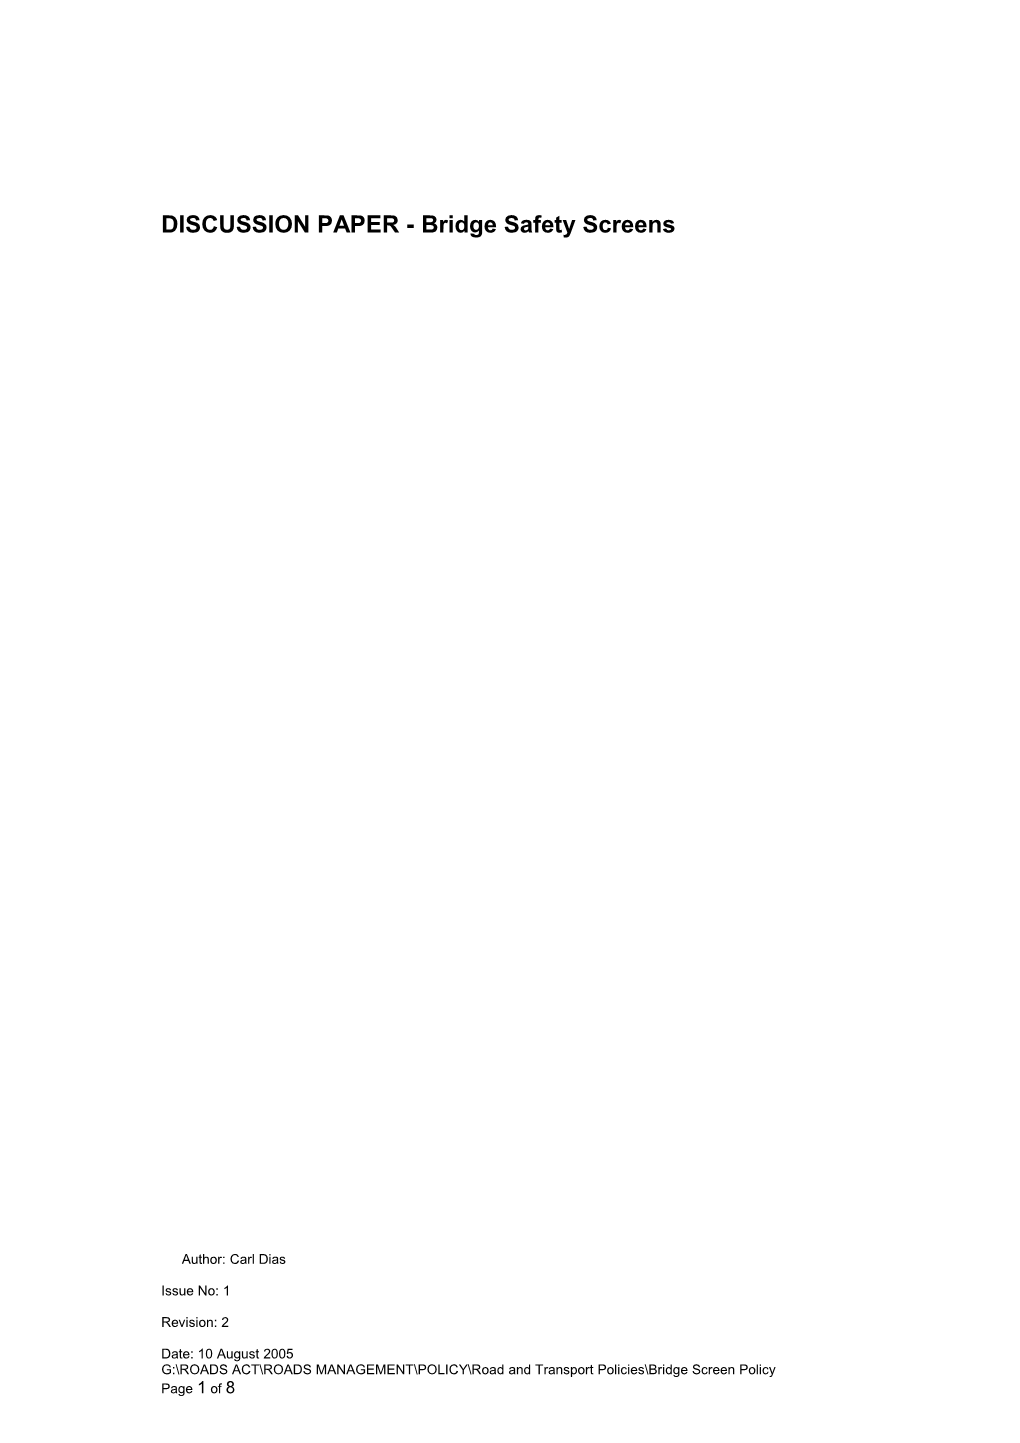 DISCUSSION PAPER - Bridge Safety Screens